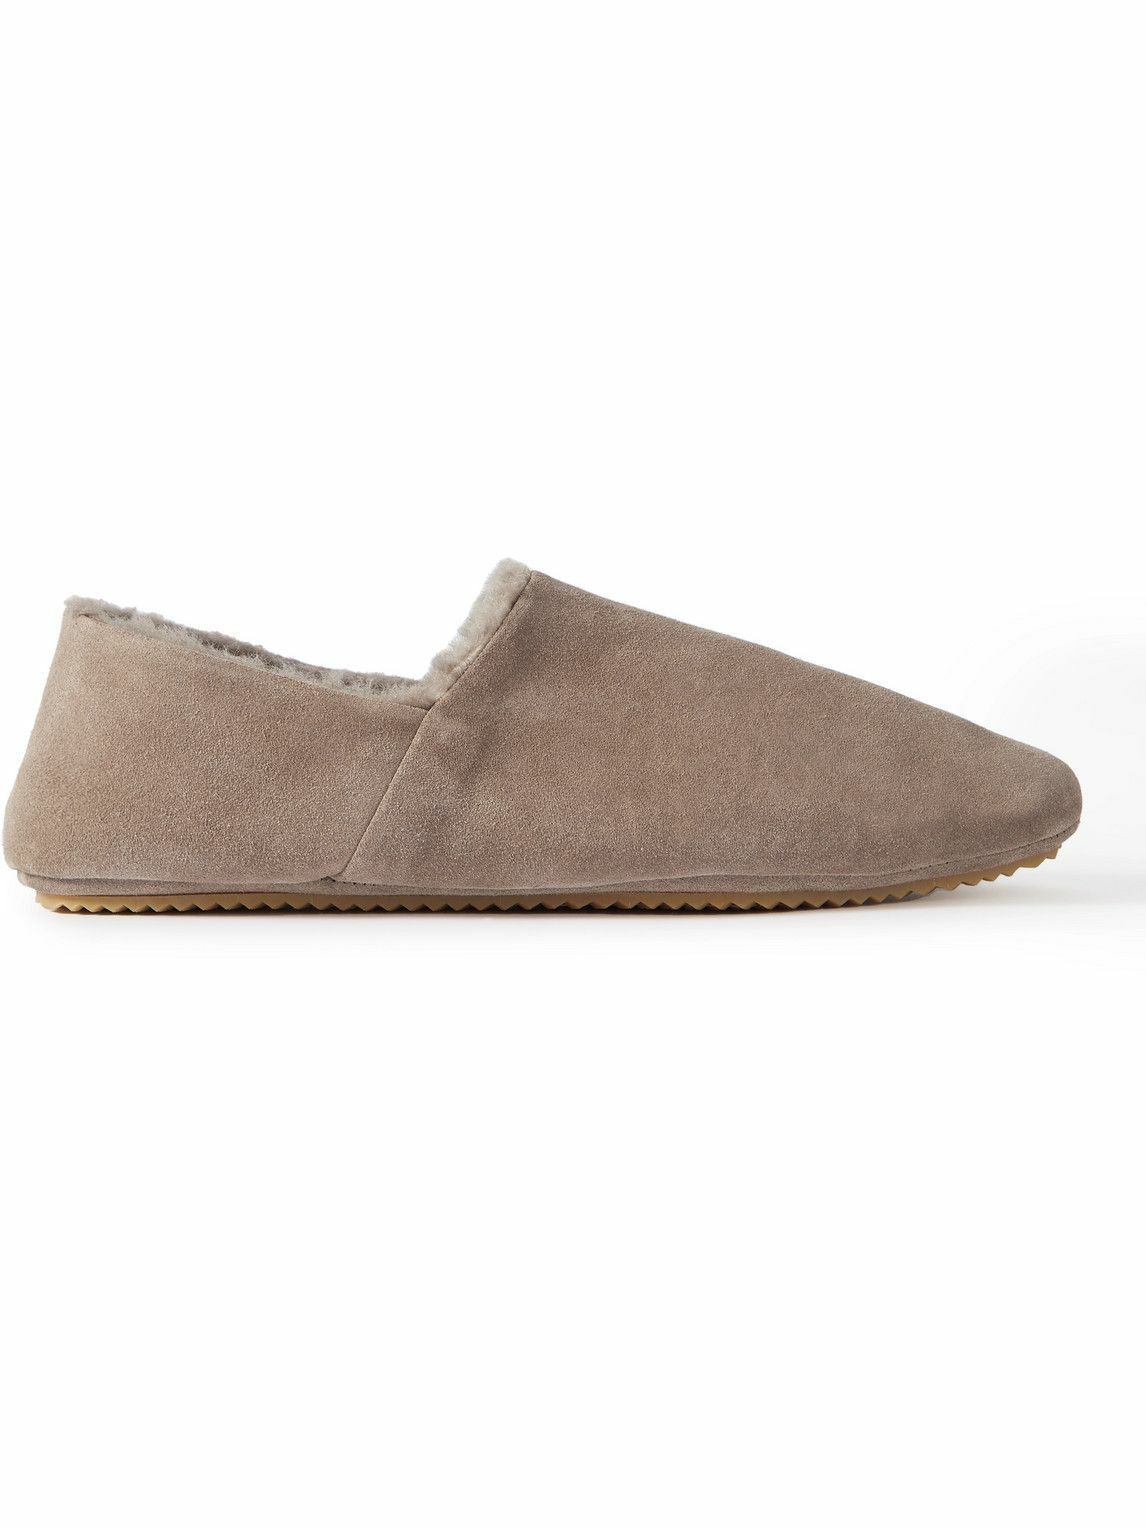 Mr P. - Babouche Shearling-Lined Suede Slippers - Neutrals Mr P.